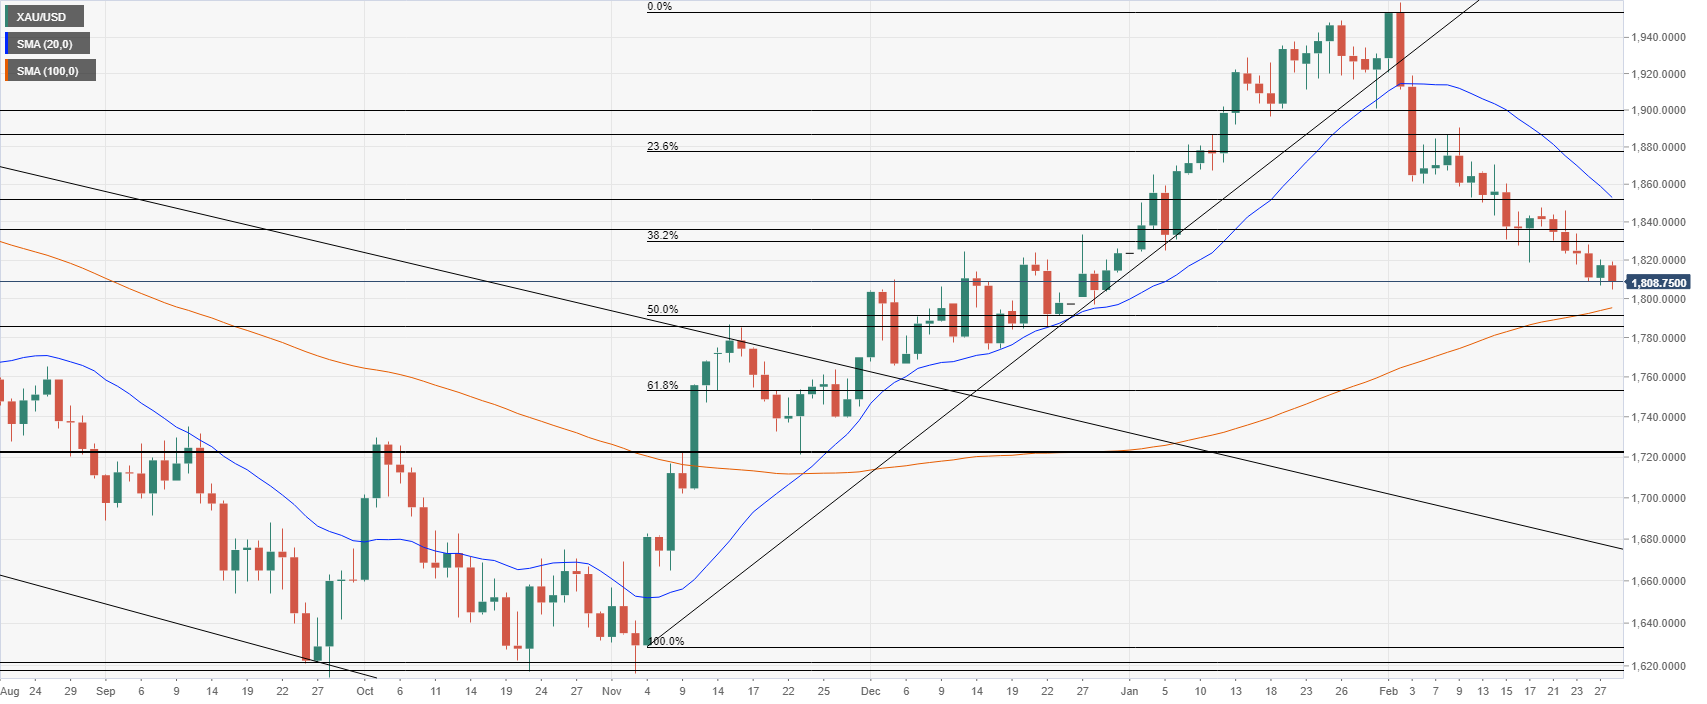 Gold price daily chart – The XAU/USD downtrend continues